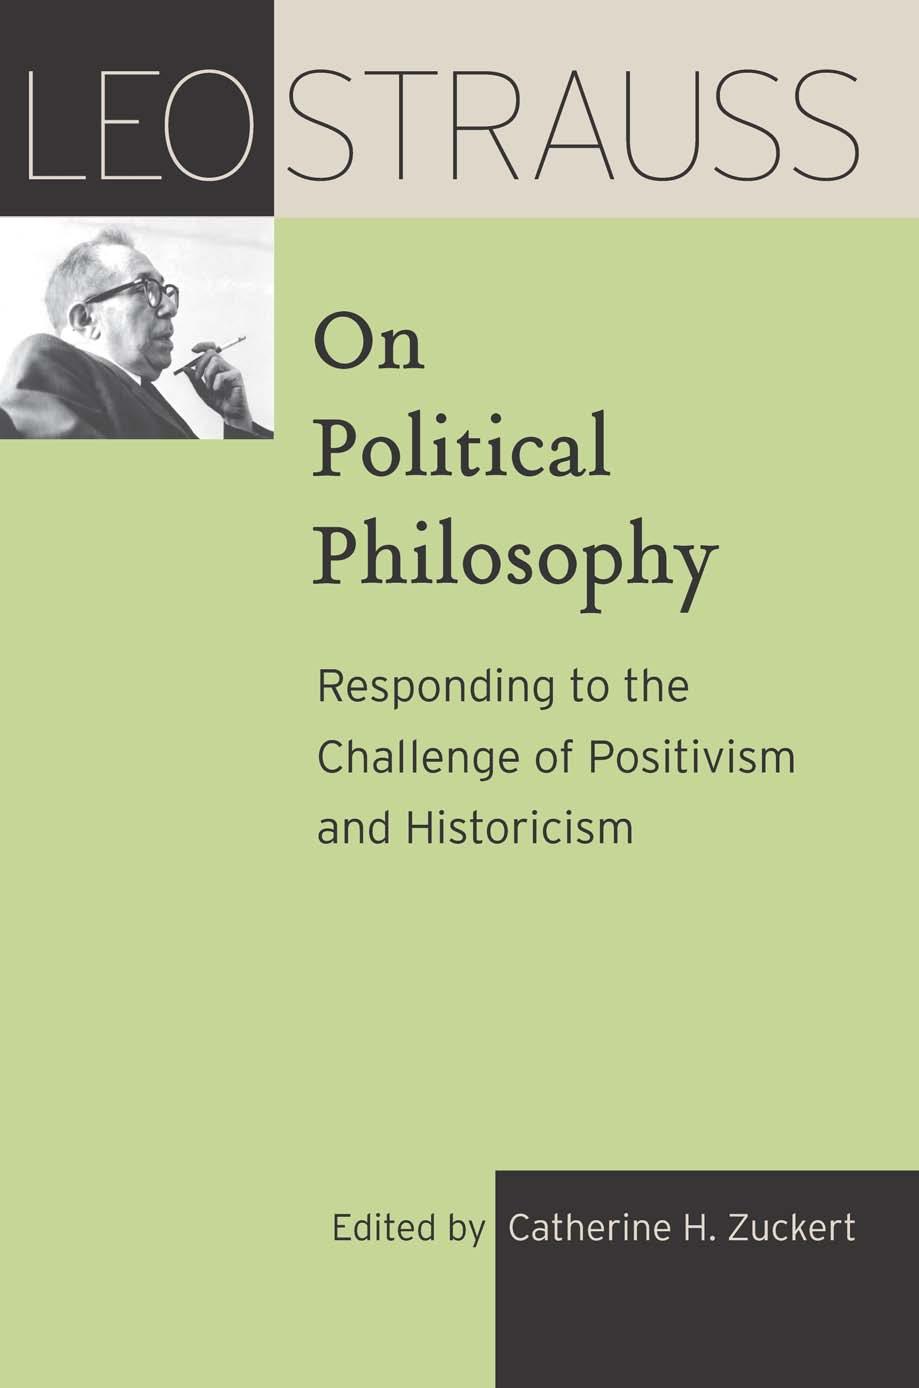 Leo Strauss on Political Philosophy: Responding to the Challenge of Positivism and Historicism